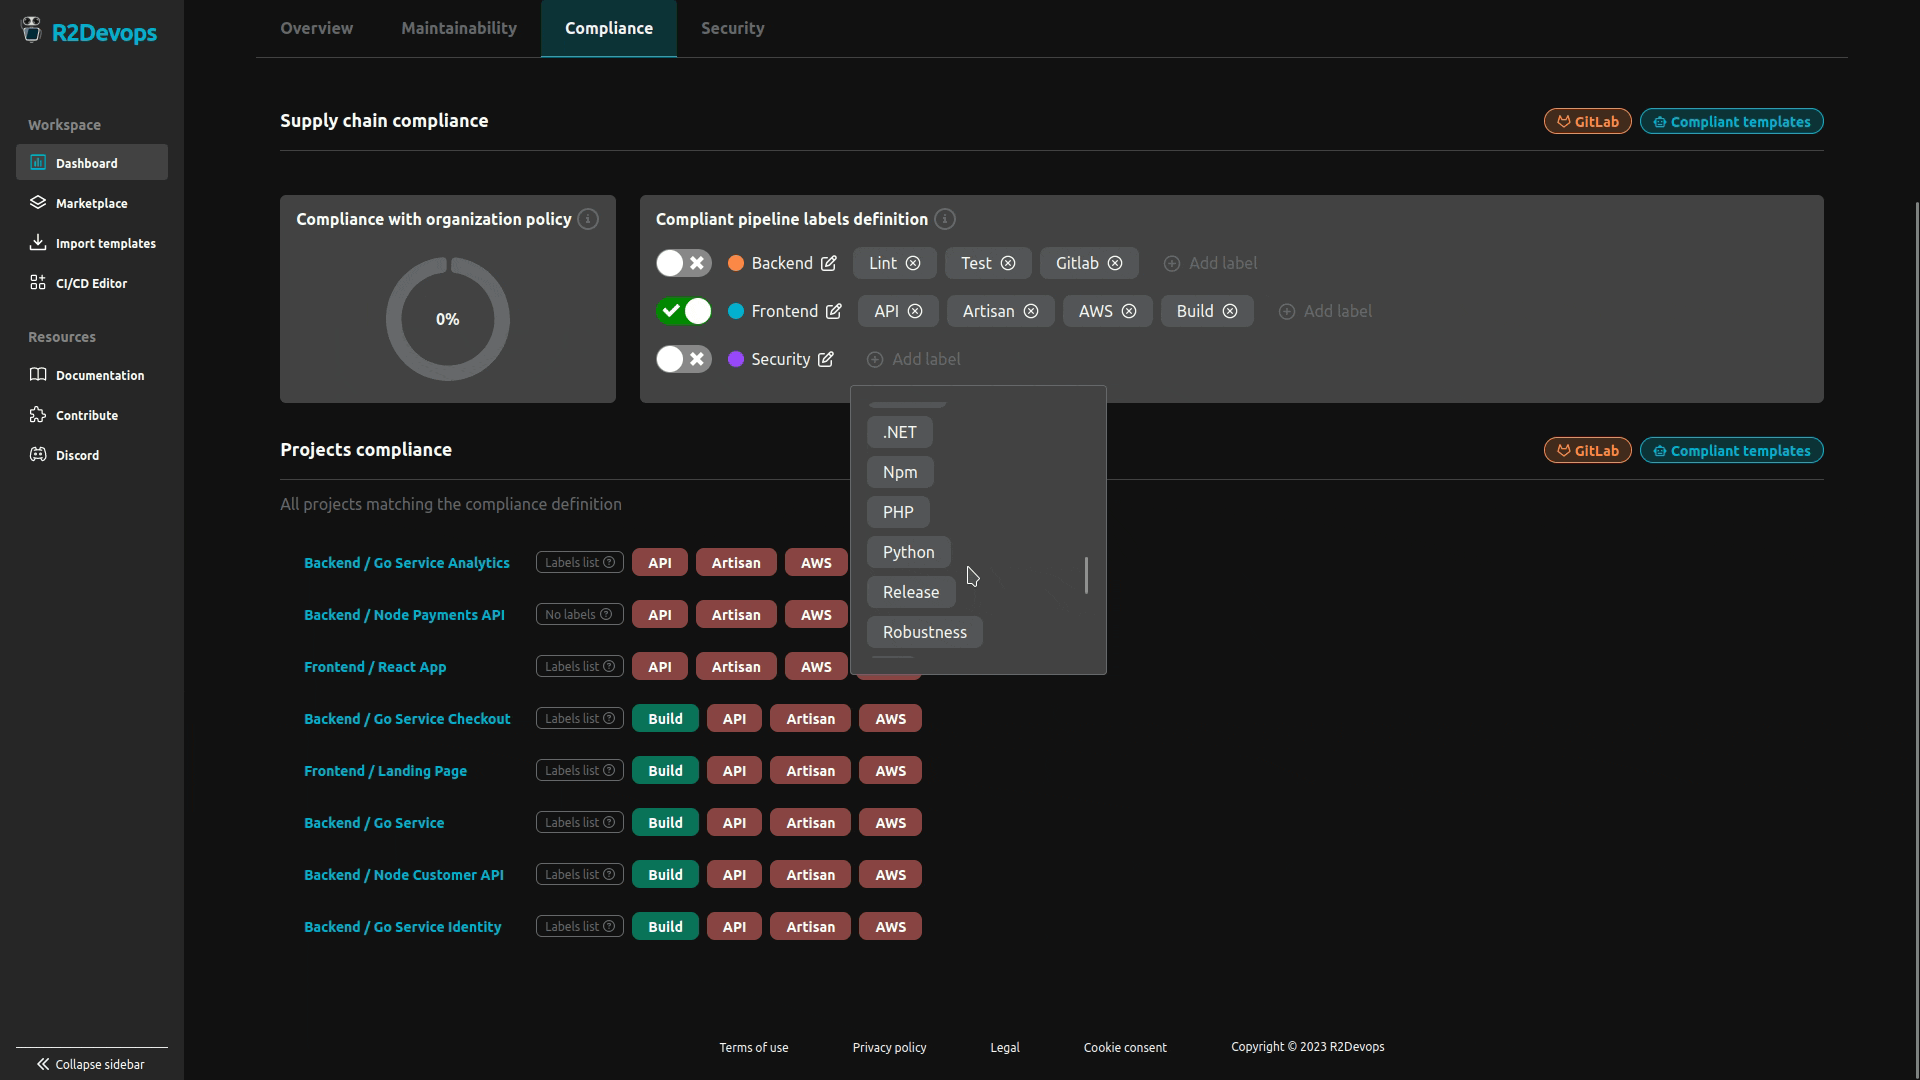 Gif of compliance section of the Analysis Dashboard